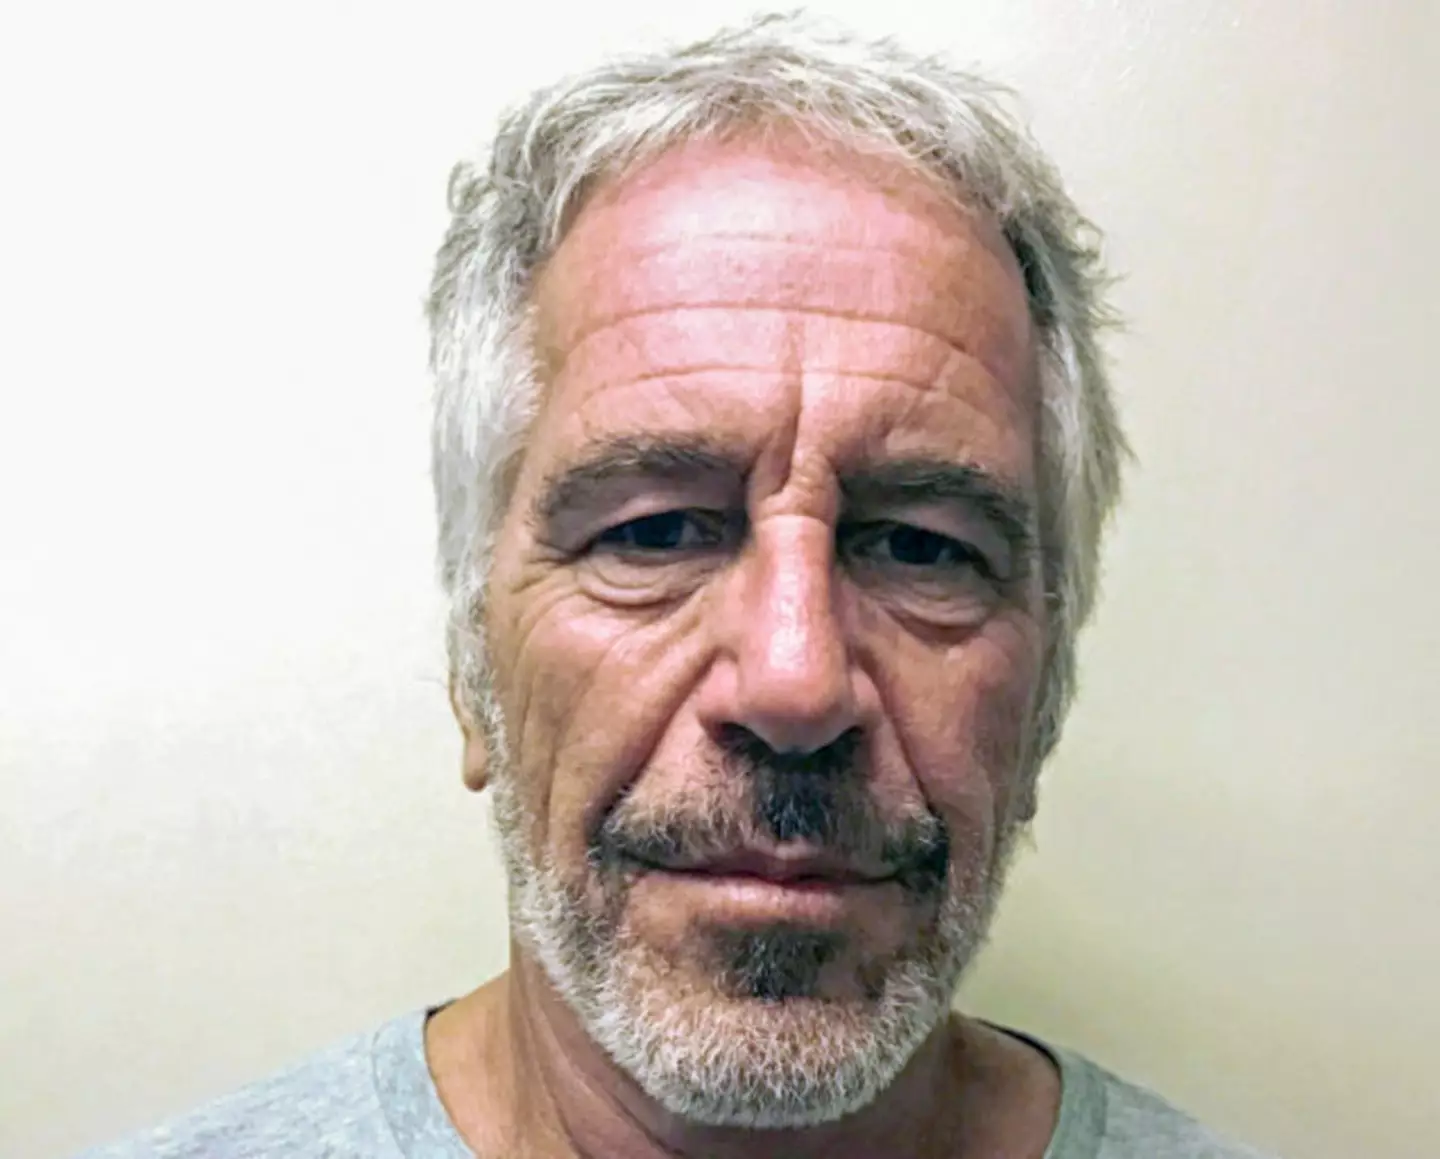 Epstein's brother has shared some evidence about the circumstances surrounding his death.